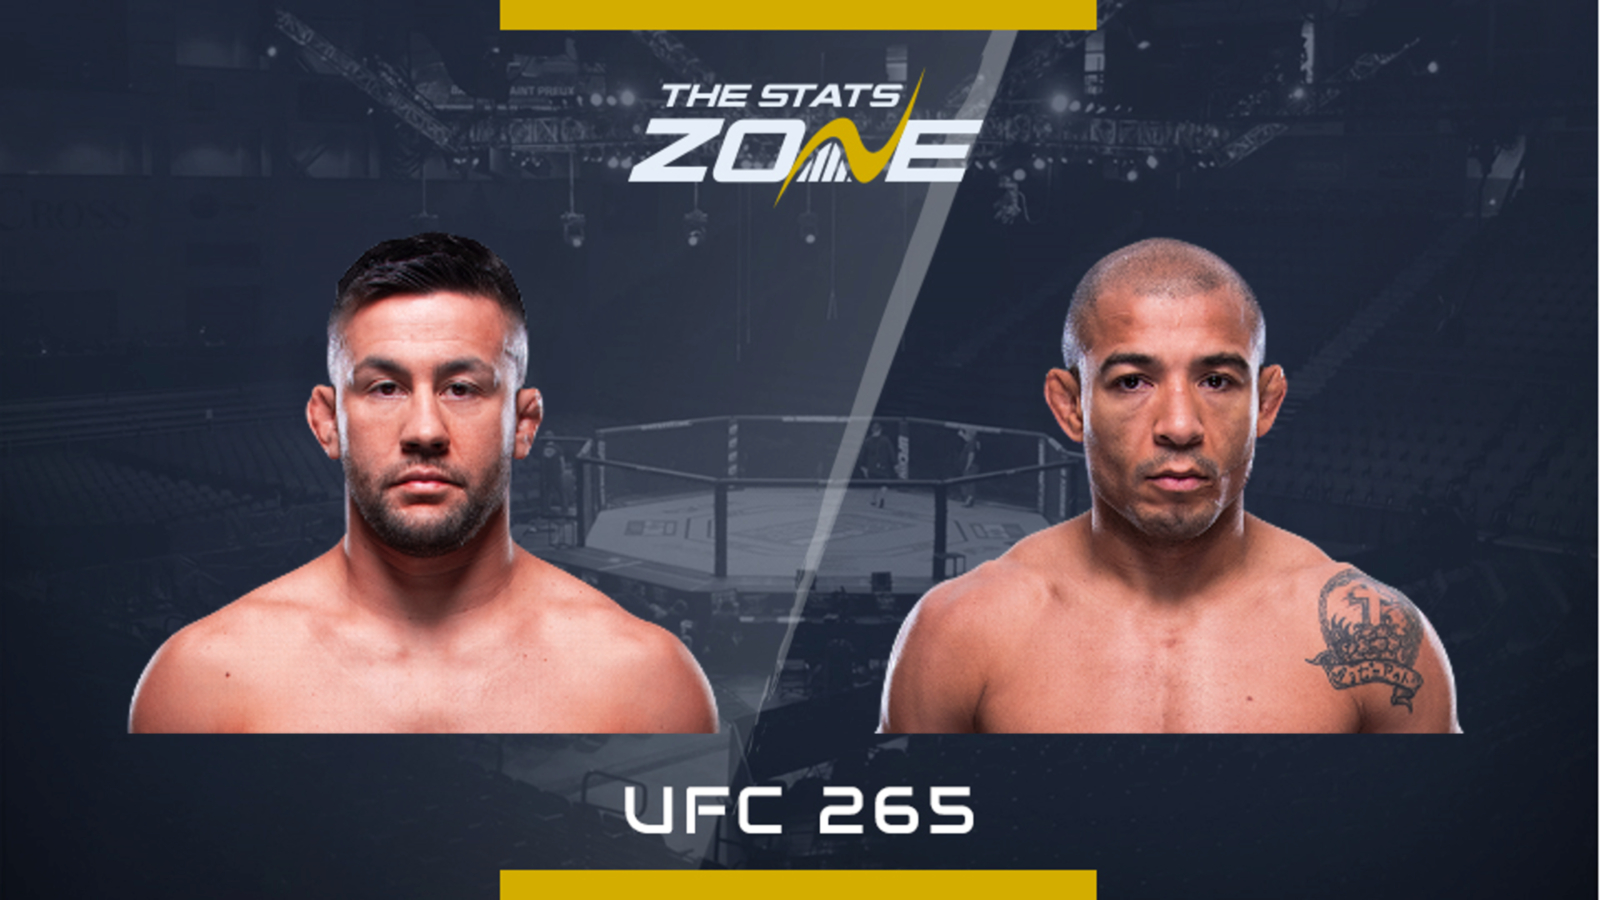 Preview Jose Pedro Munhoz at UFC 265 - The Stats Zone